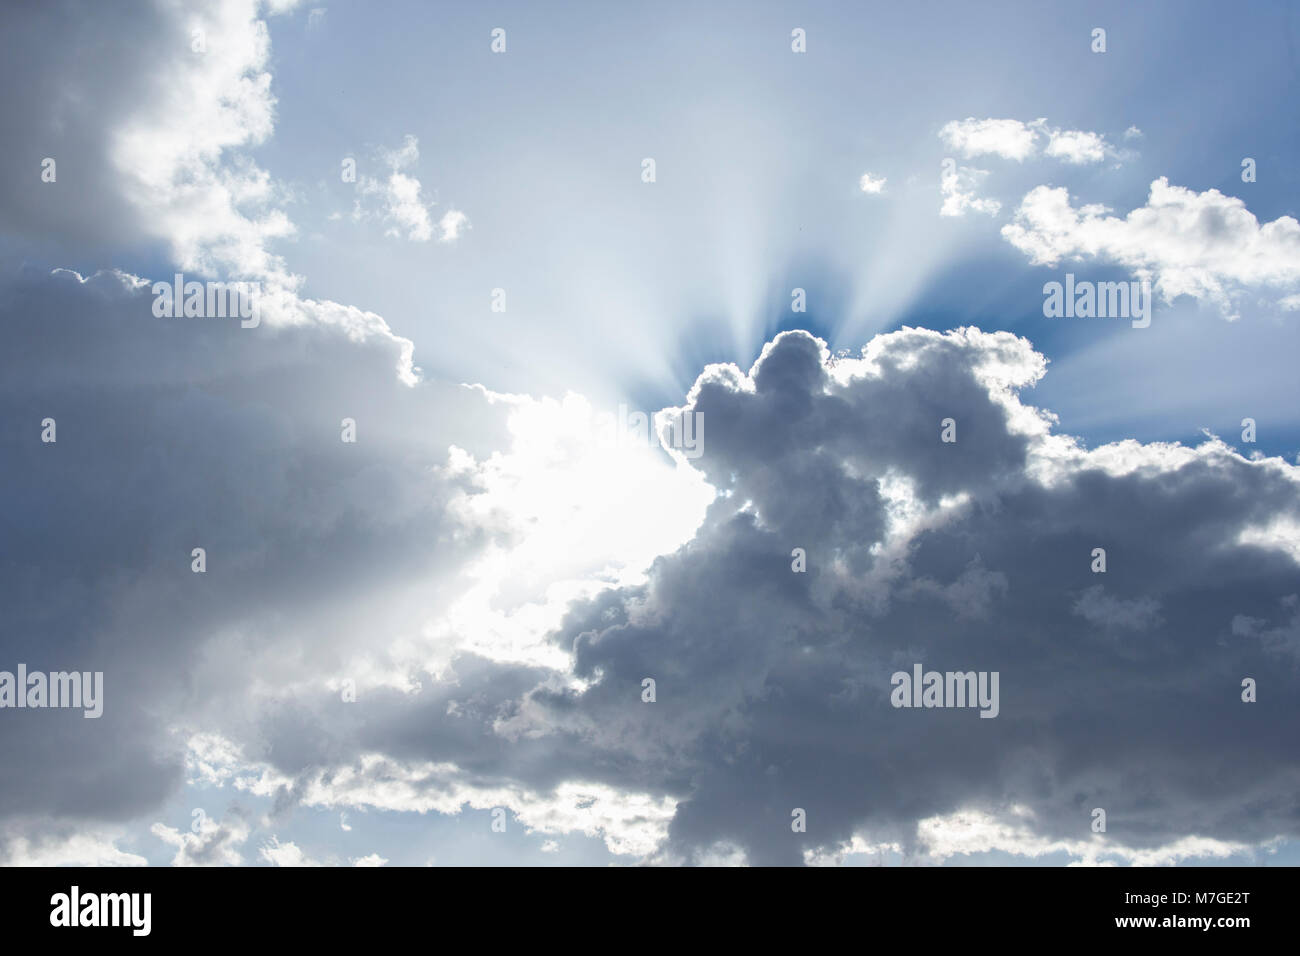 Sun rays coming out from behind clouds in bright blue skyninspiring Stock Photo